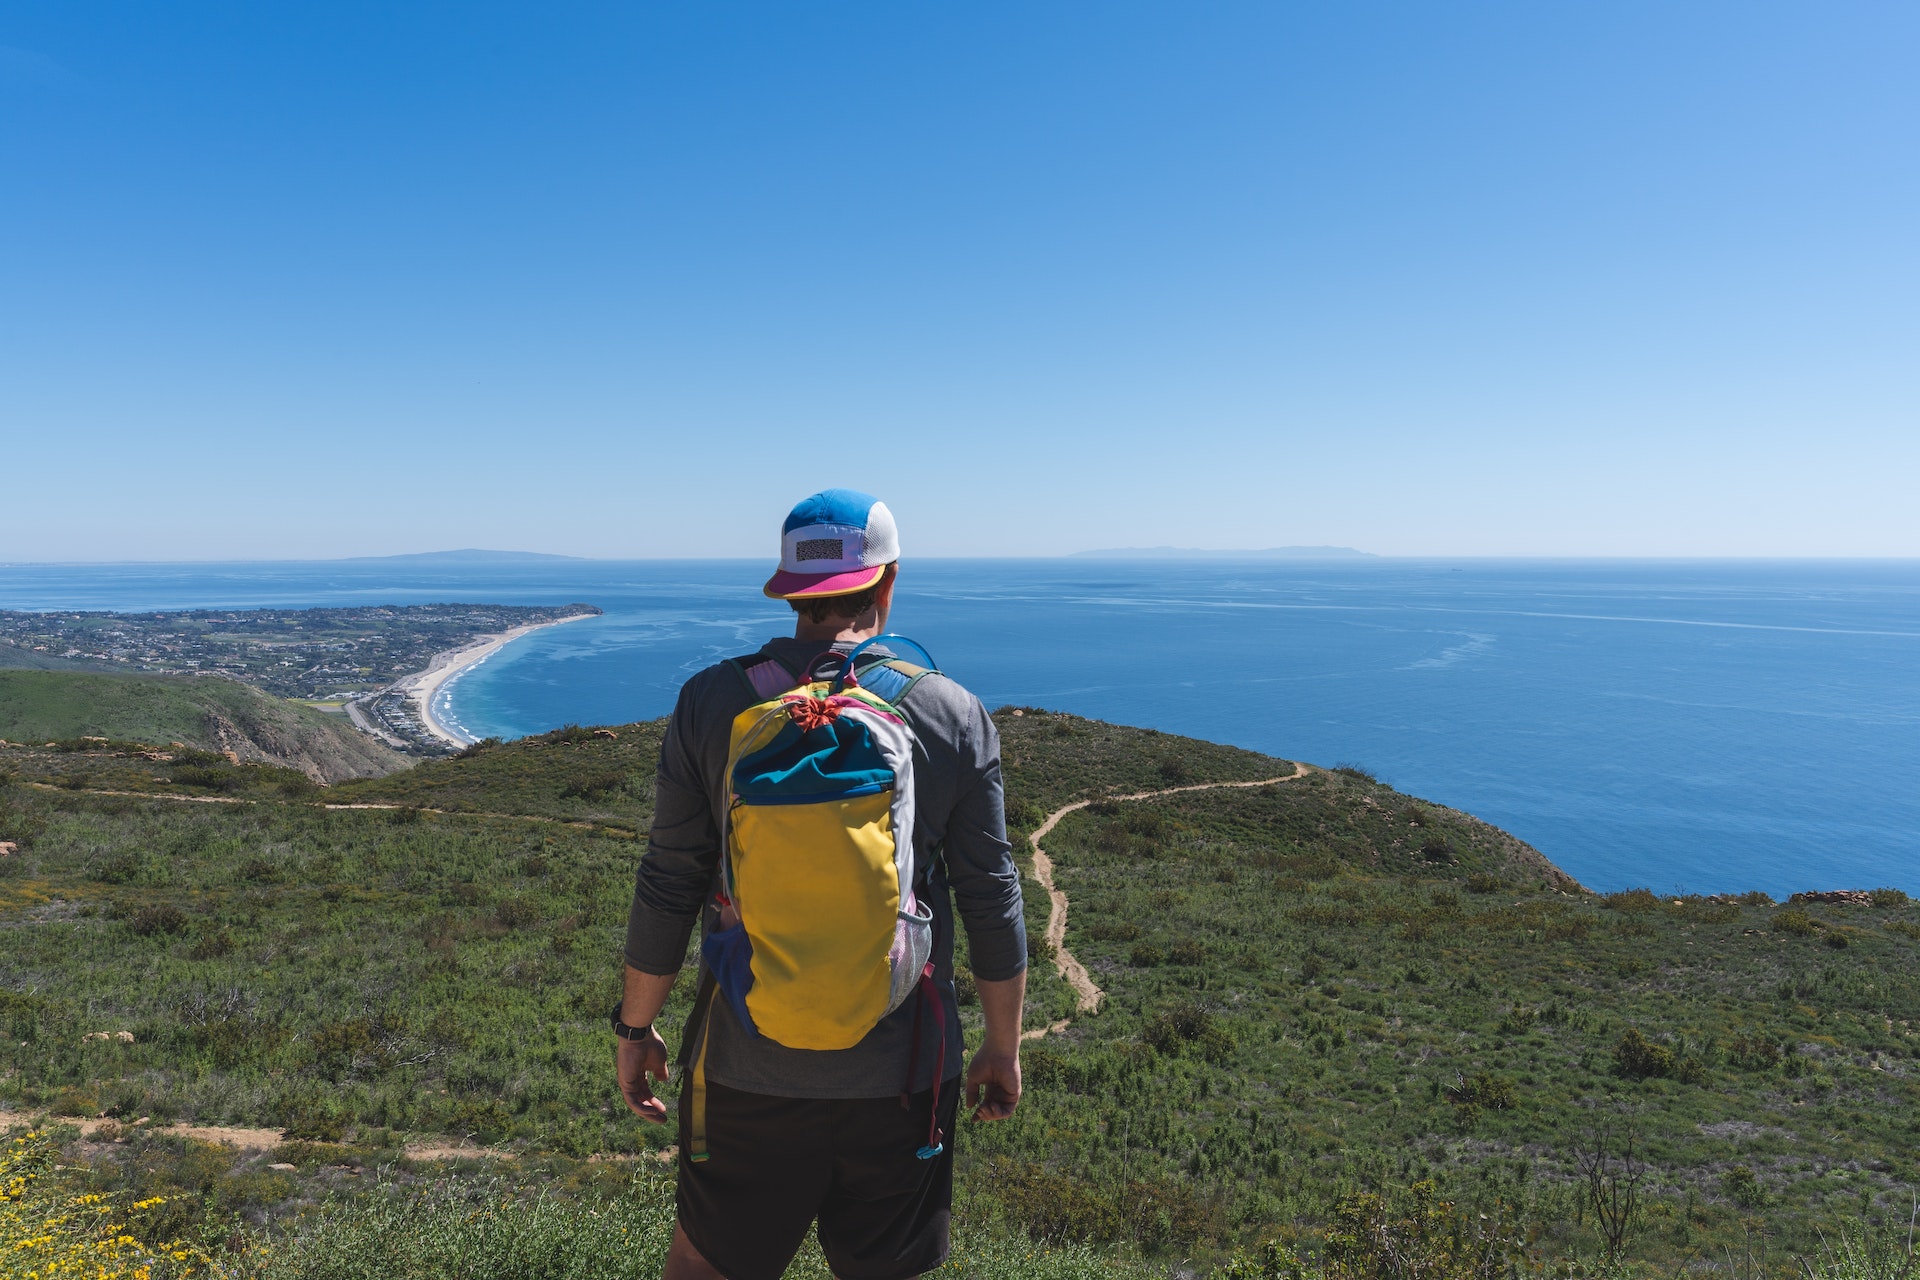 A hiker looking out at the Pacific Ocean from a summit Charmlee Wilderness Park, Malibu, California, USA